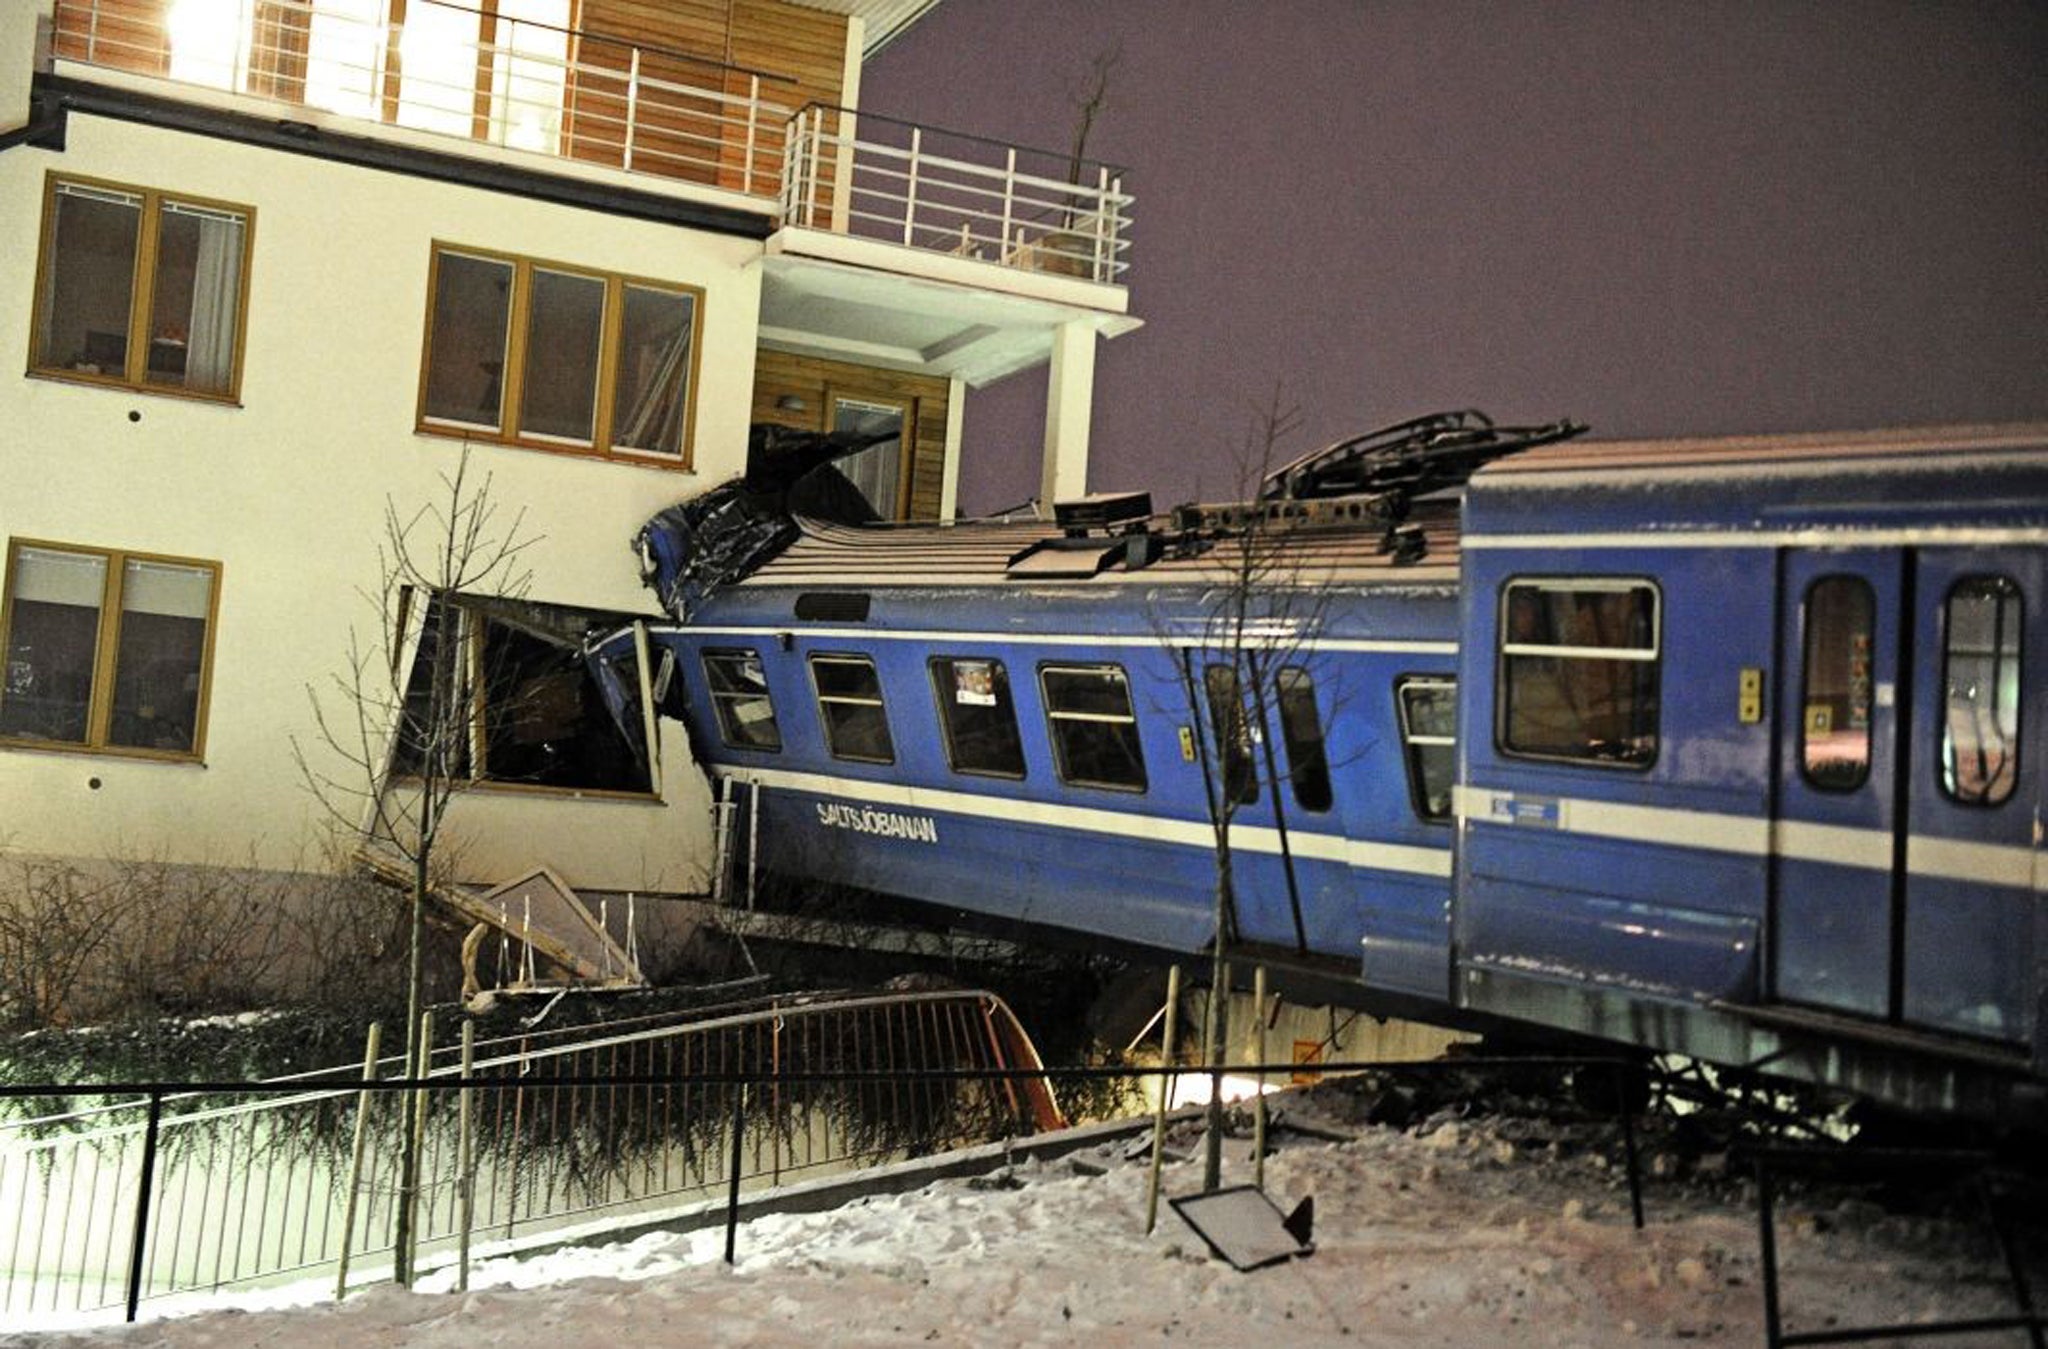 The train careered for about 30 yards and crashed into a three-story building